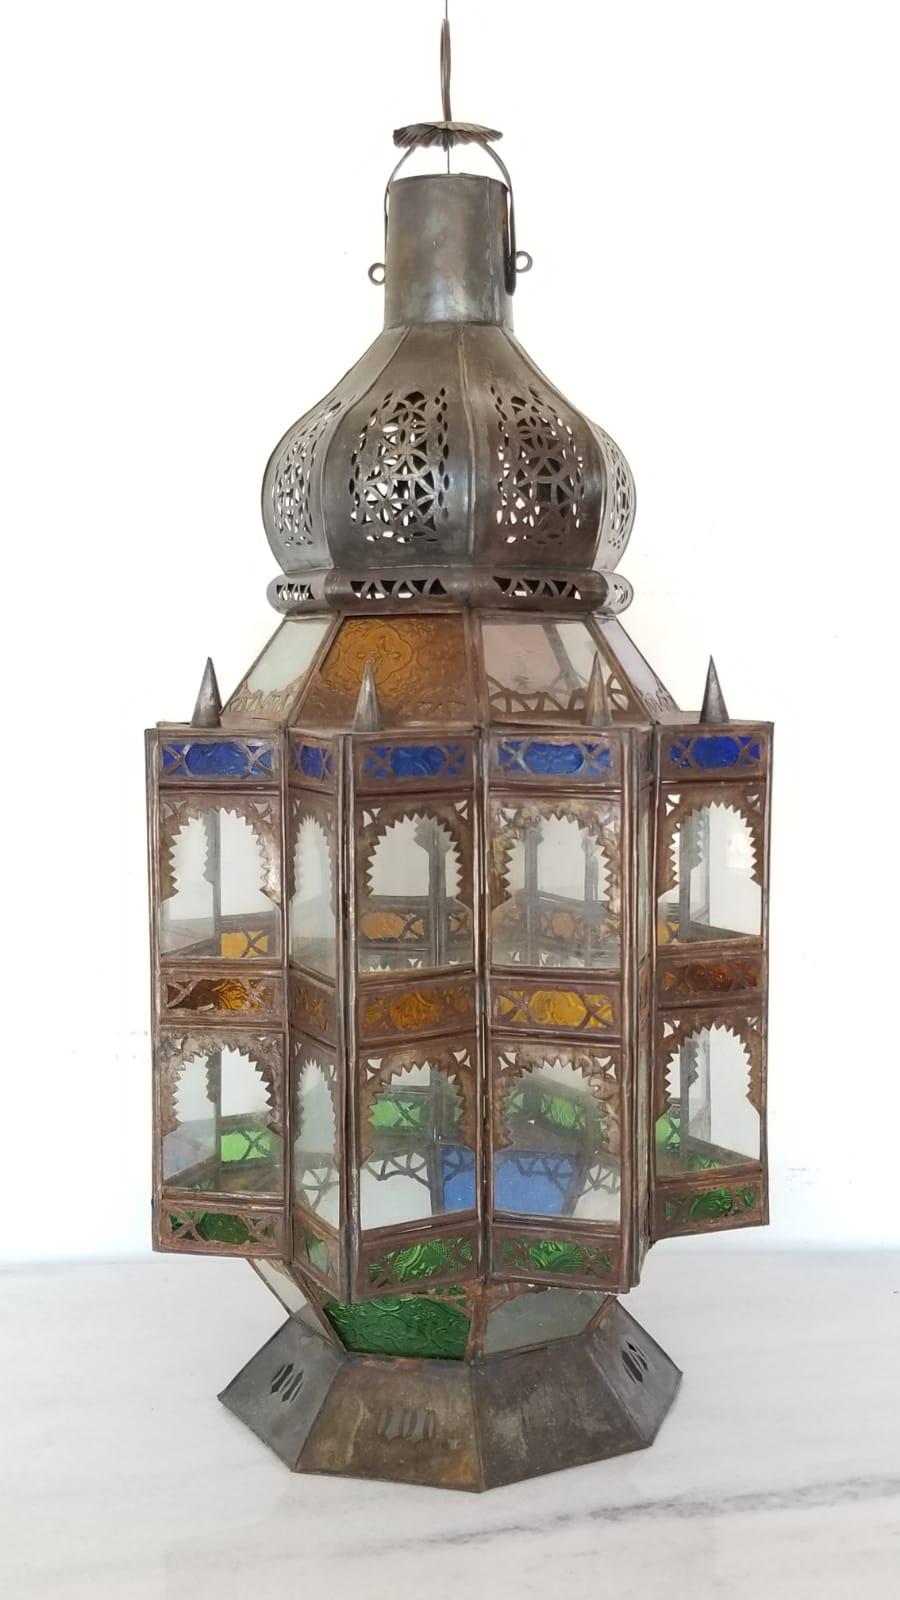 Superb Moroccan rustic lantern chandelier. Great workmanship, all handmade. A great piece for indoor or outdoor. The lantern come with frosted glass and multi-color Moorish glass amber, blue and green.